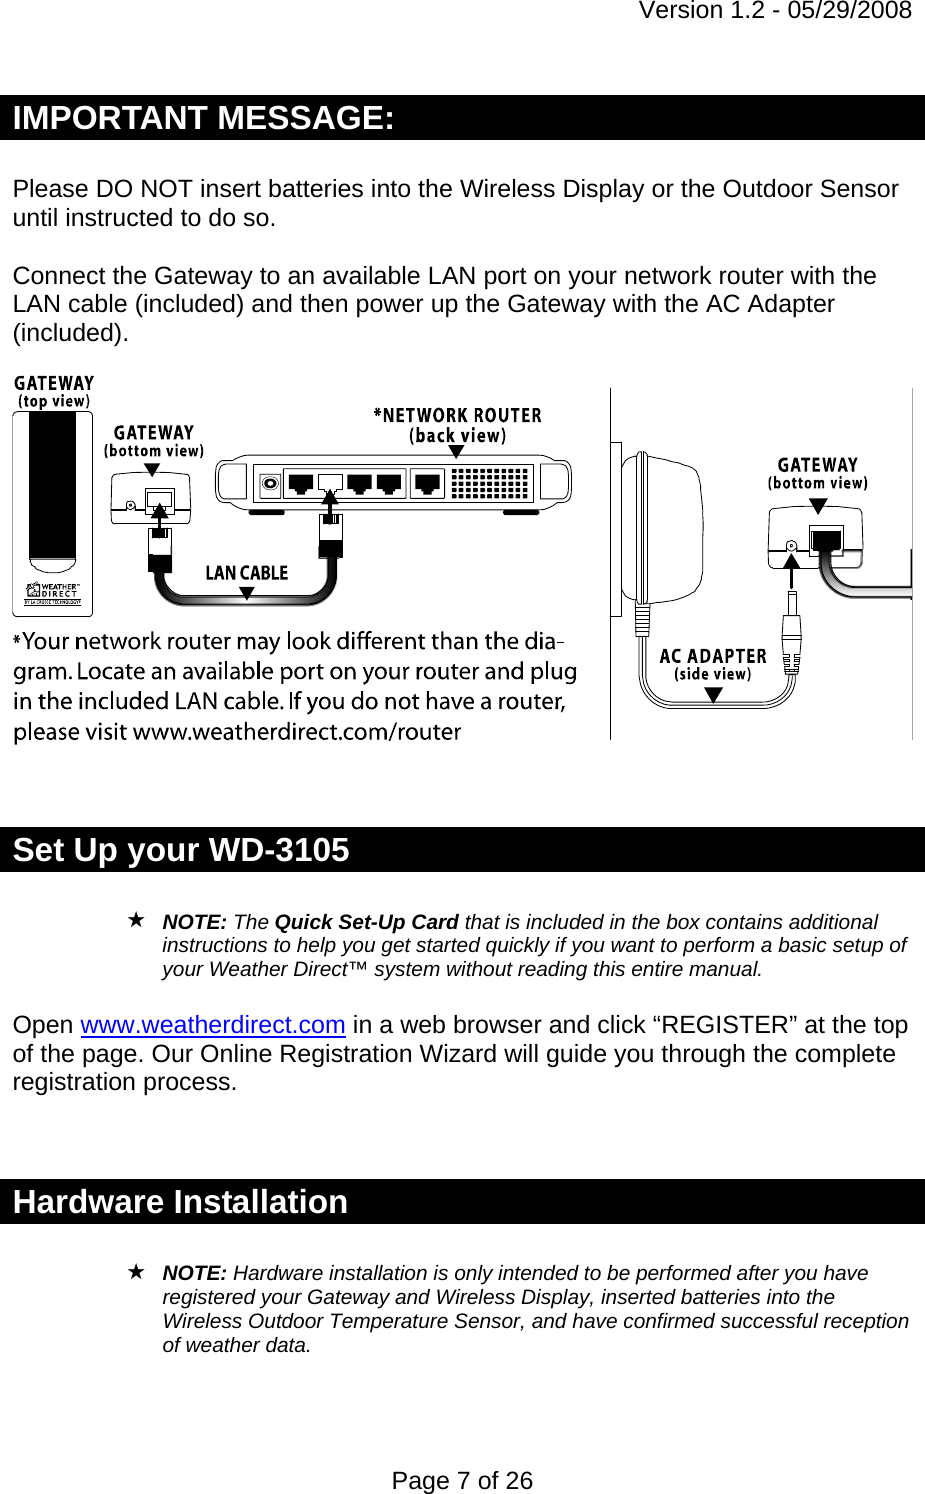 Version 1.2 - 05/29/2008 Page 7 of 26 IMPORTANT MESSAGE:  Please DO NOT insert batteries into the Wireless Display or the Outdoor Sensor until instructed to do so.   Connect the Gateway to an available LAN port on your network router with the LAN cable (included) and then power up the Gateway with the AC Adapter (included).     Set Up your WD-3105   NOTE: The Quick Set-Up Card that is included in the box contains additional instructions to help you get started quickly if you want to perform a basic setup of your Weather Direct™ system without reading this entire manual.  Open www.weatherdirect.com in a web browser and click “REGISTER” at the top of the page. Our Online Registration Wizard will guide you through the complete registration process.   Hardware Installation   NOTE: Hardware installation is only intended to be performed after you have registered your Gateway and Wireless Display, inserted batteries into the Wireless Outdoor Temperature Sensor, and have confirmed successful reception of weather data.    